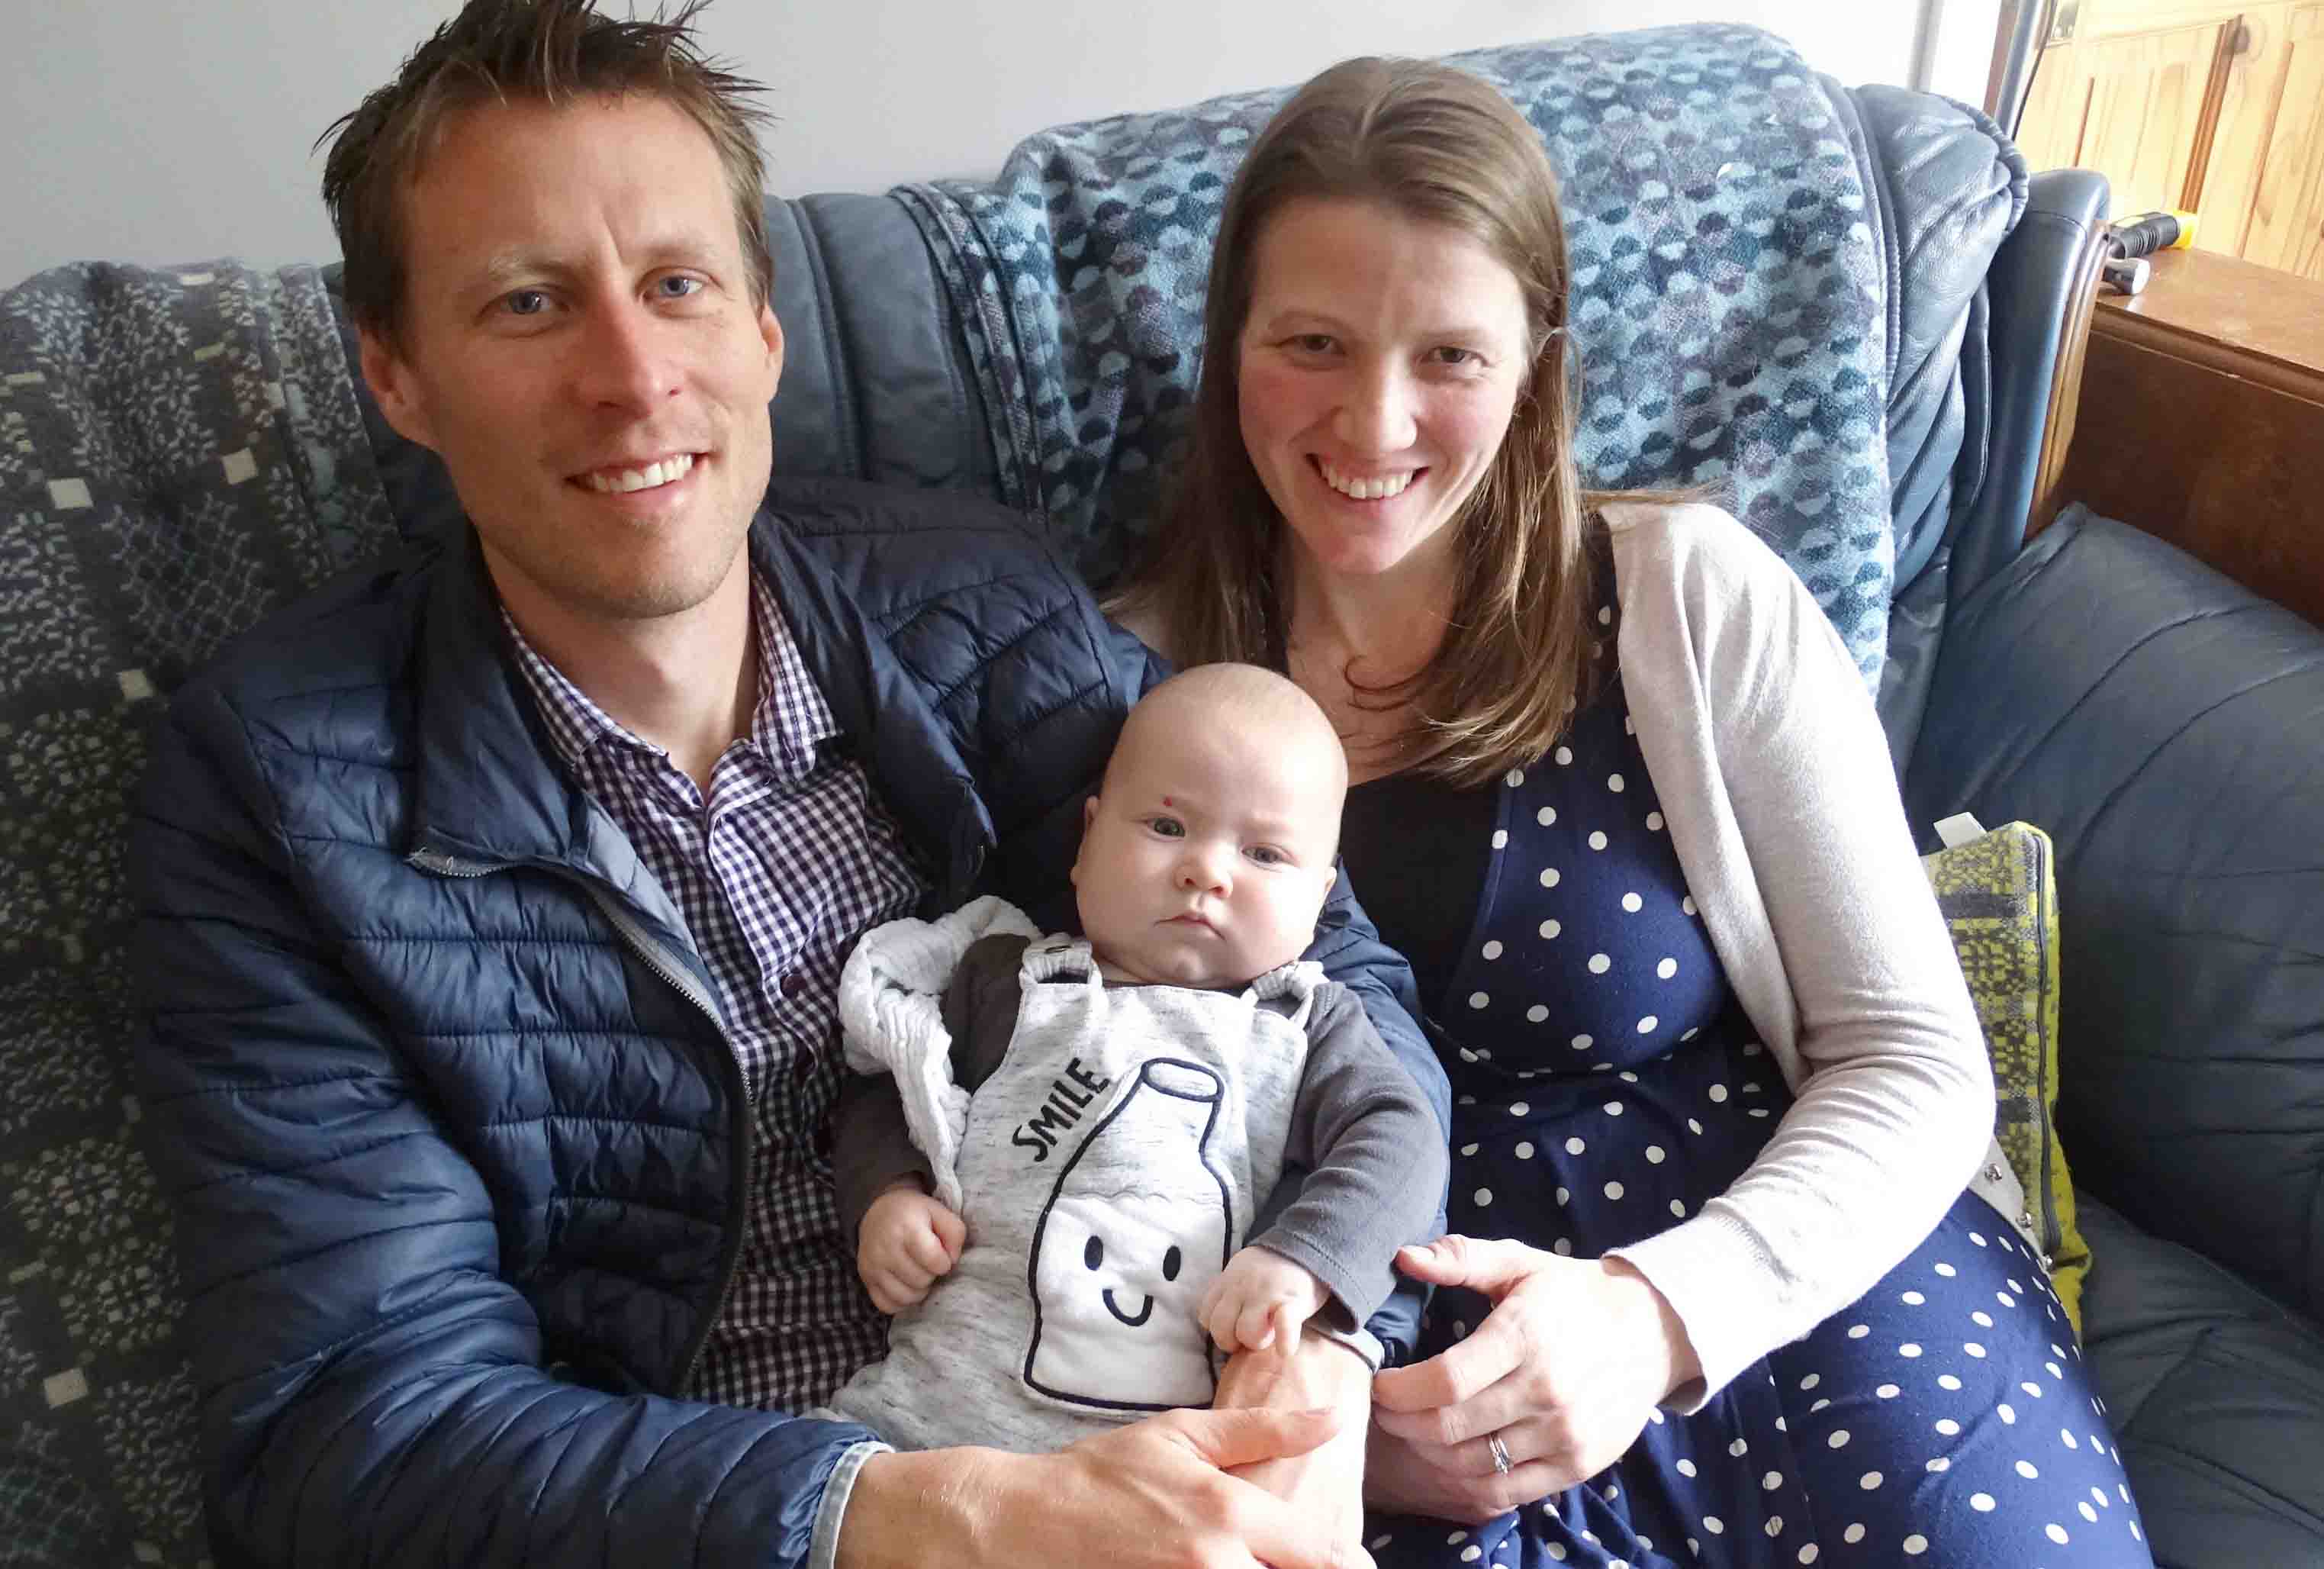 Couple raise funds for neonatal unit they set up in Liberia after son born early The Independent